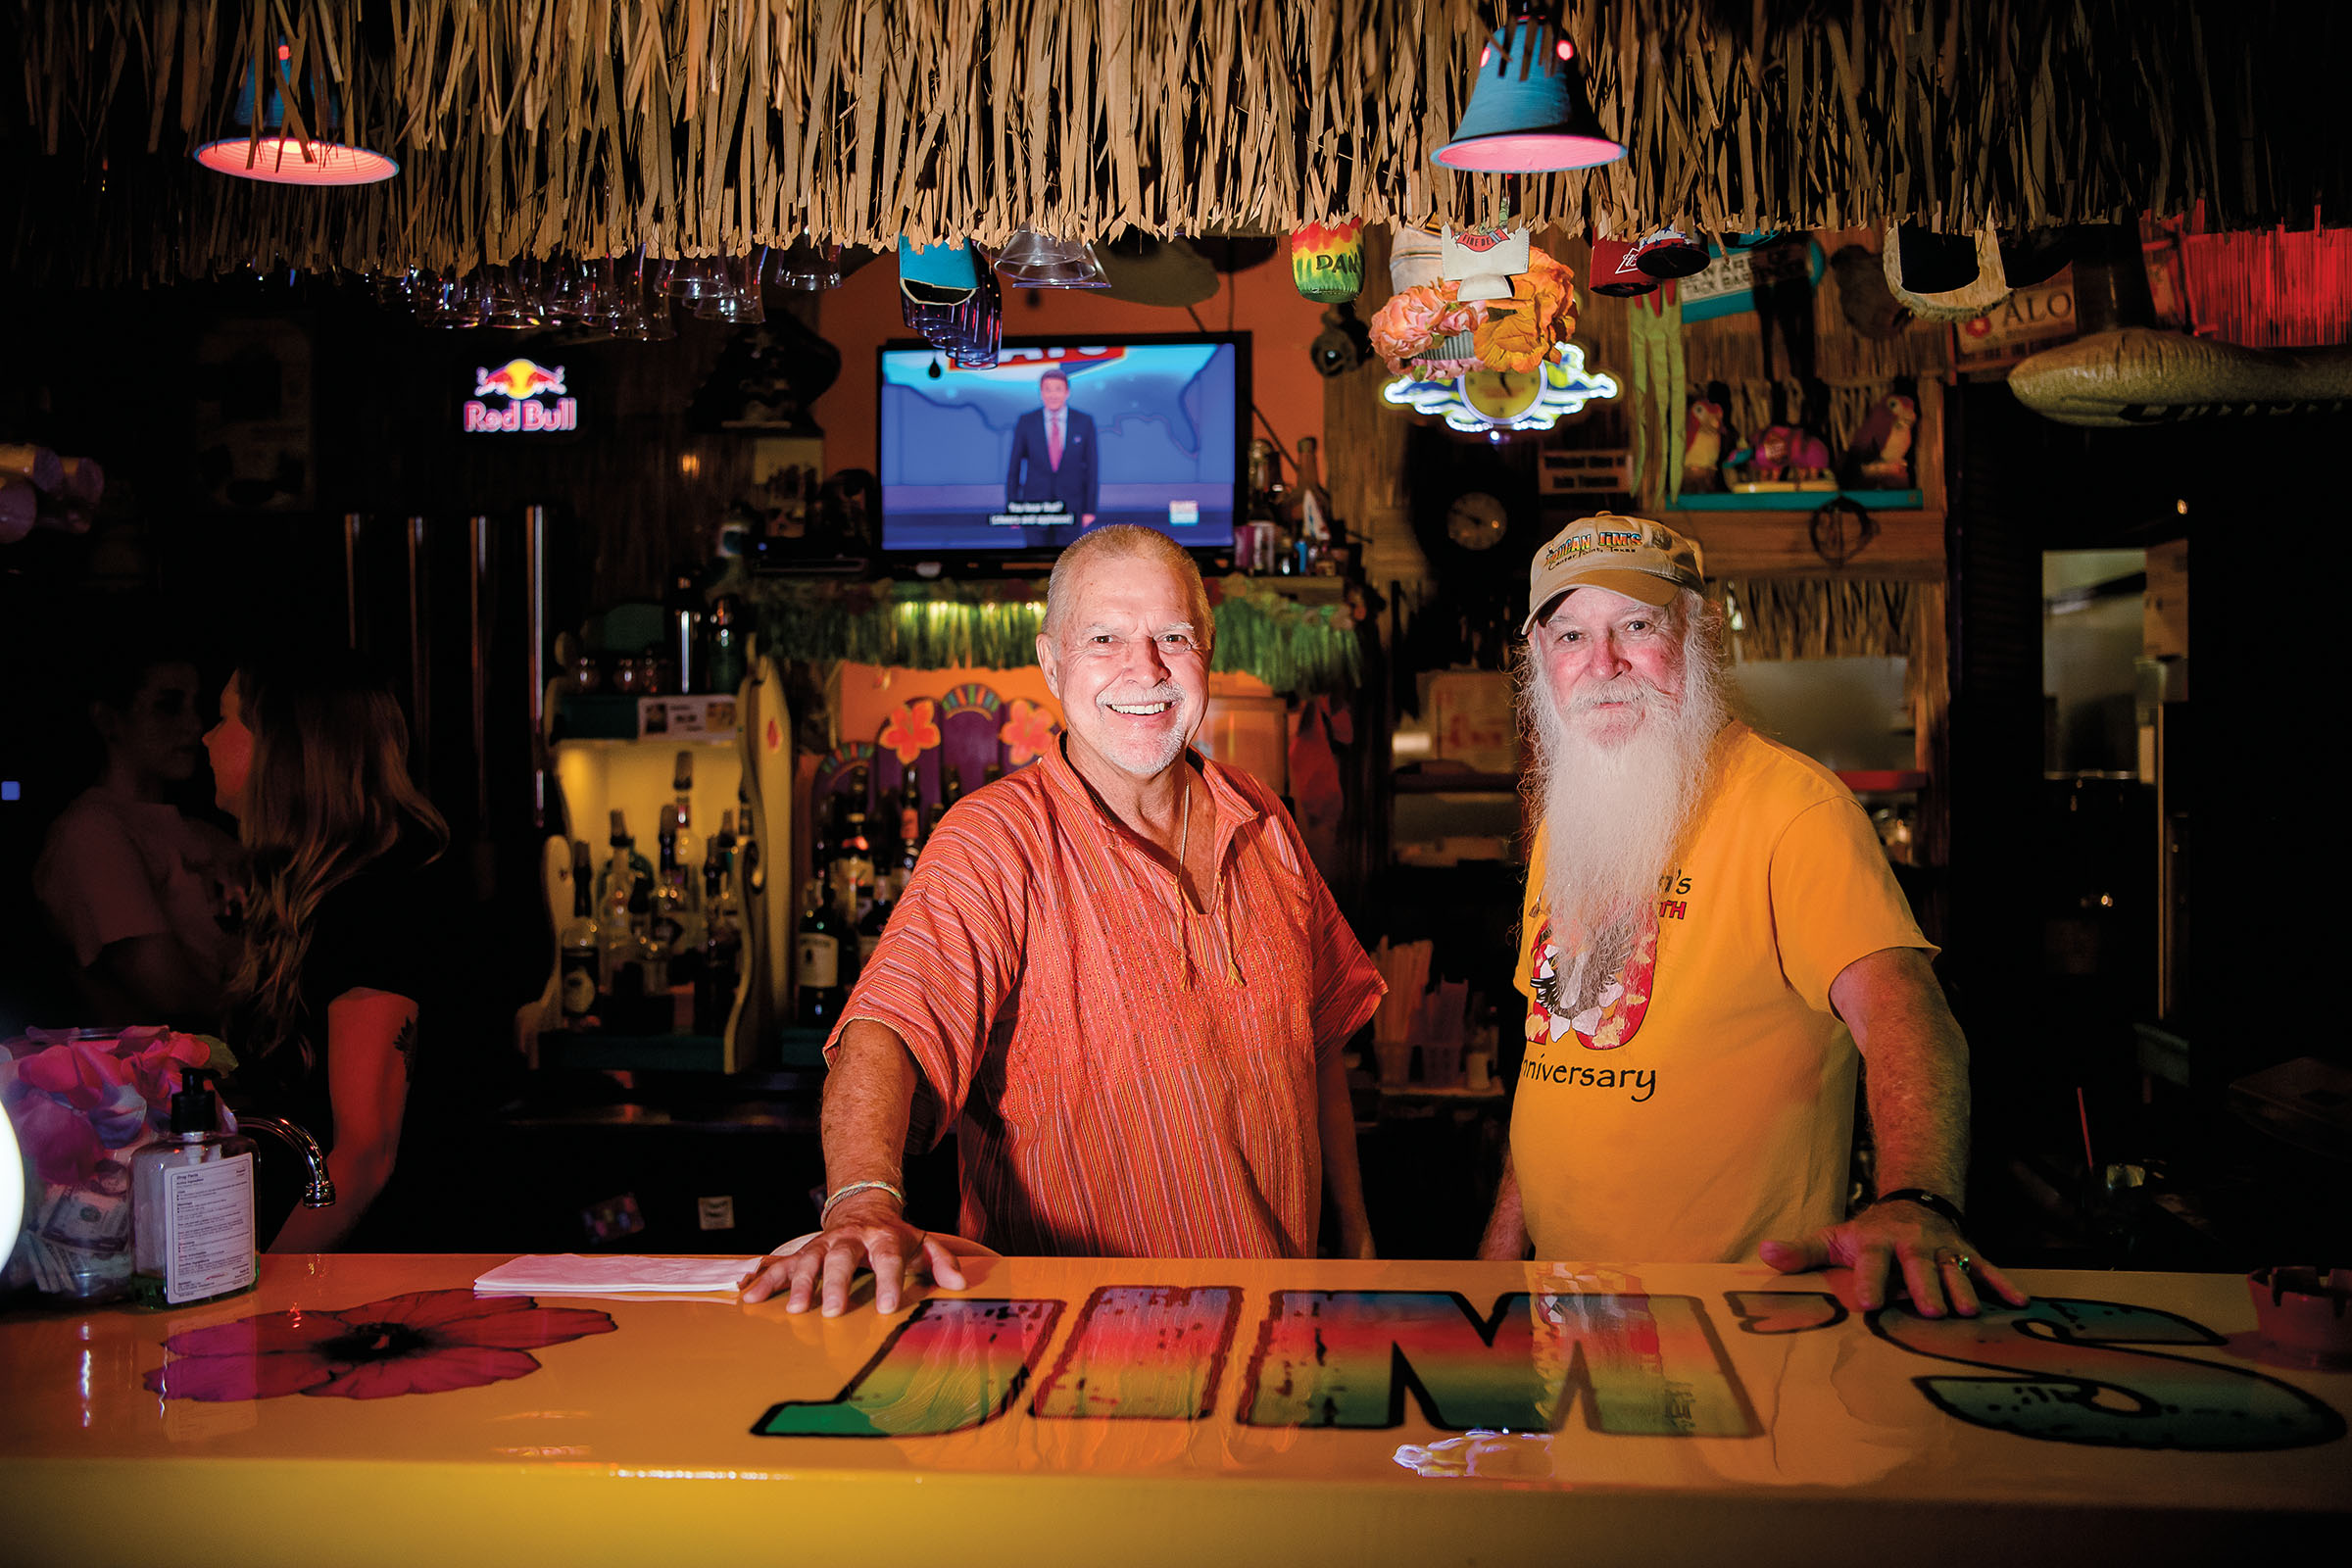 Two men smile behind a warmy-lit bar with a yellow bartop reading "Jim's"